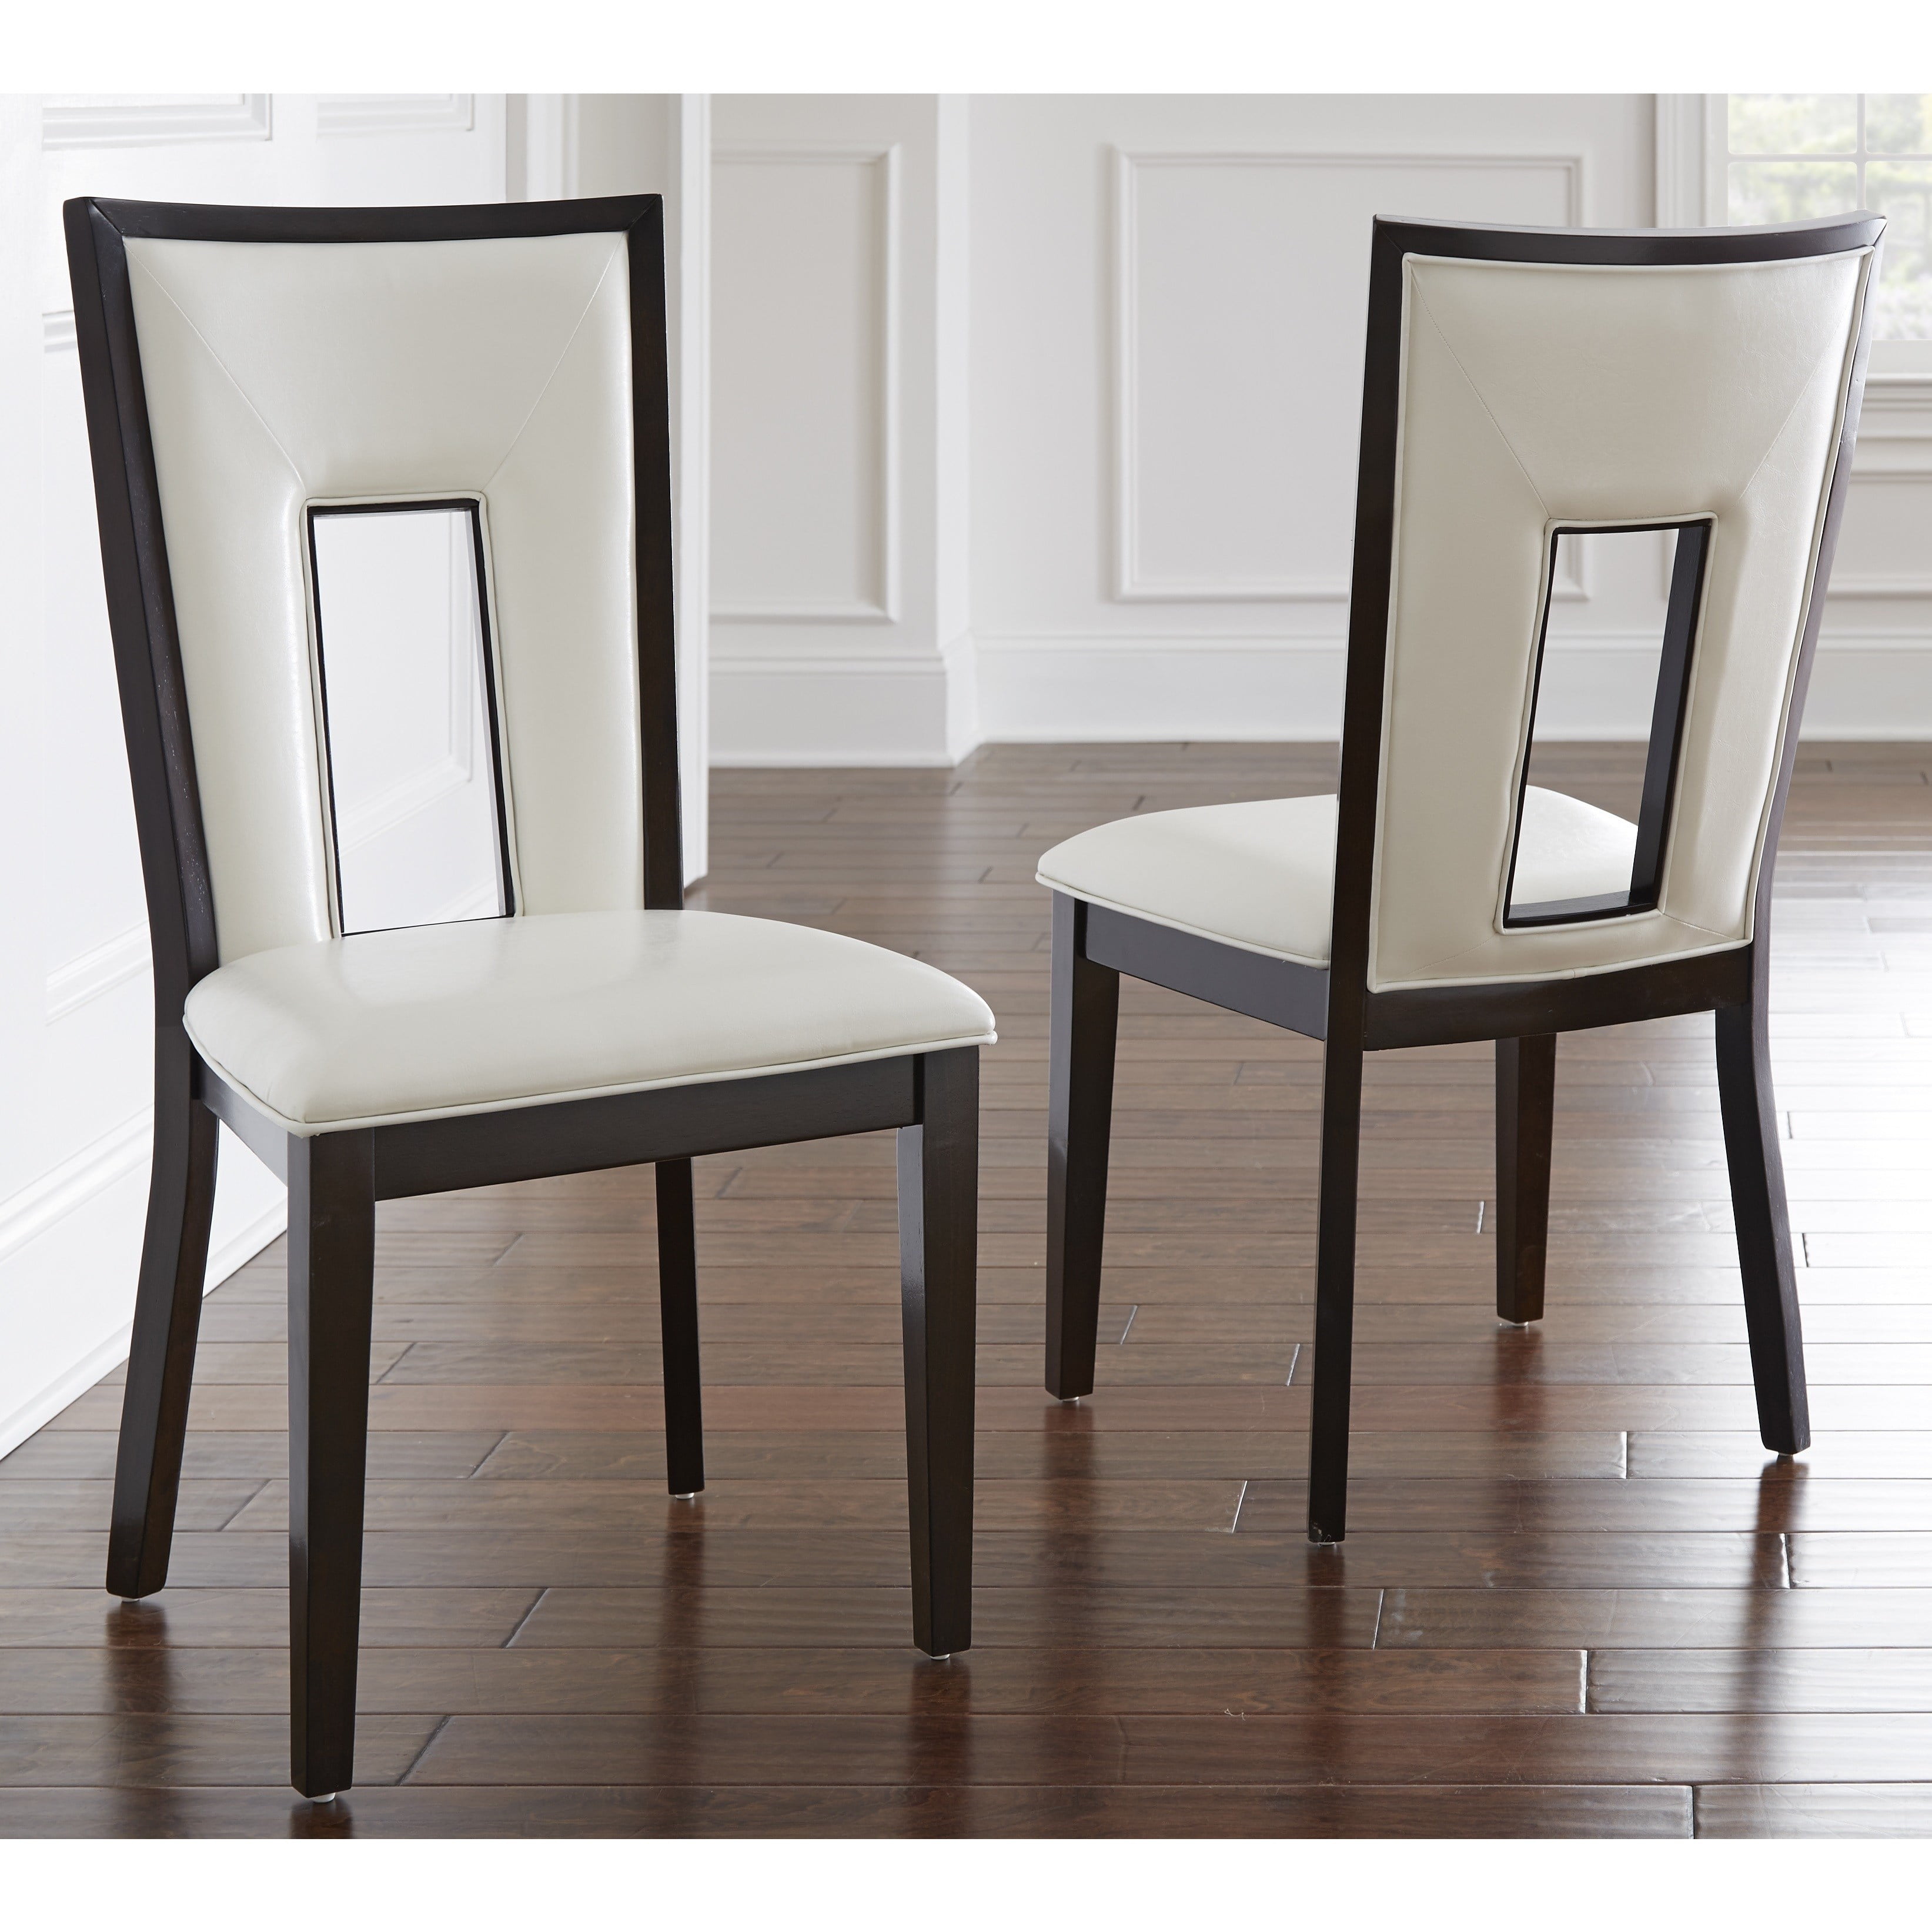 Strick Bolton Ettinger Cream Dining, Leather Keyhole Dining Chairs